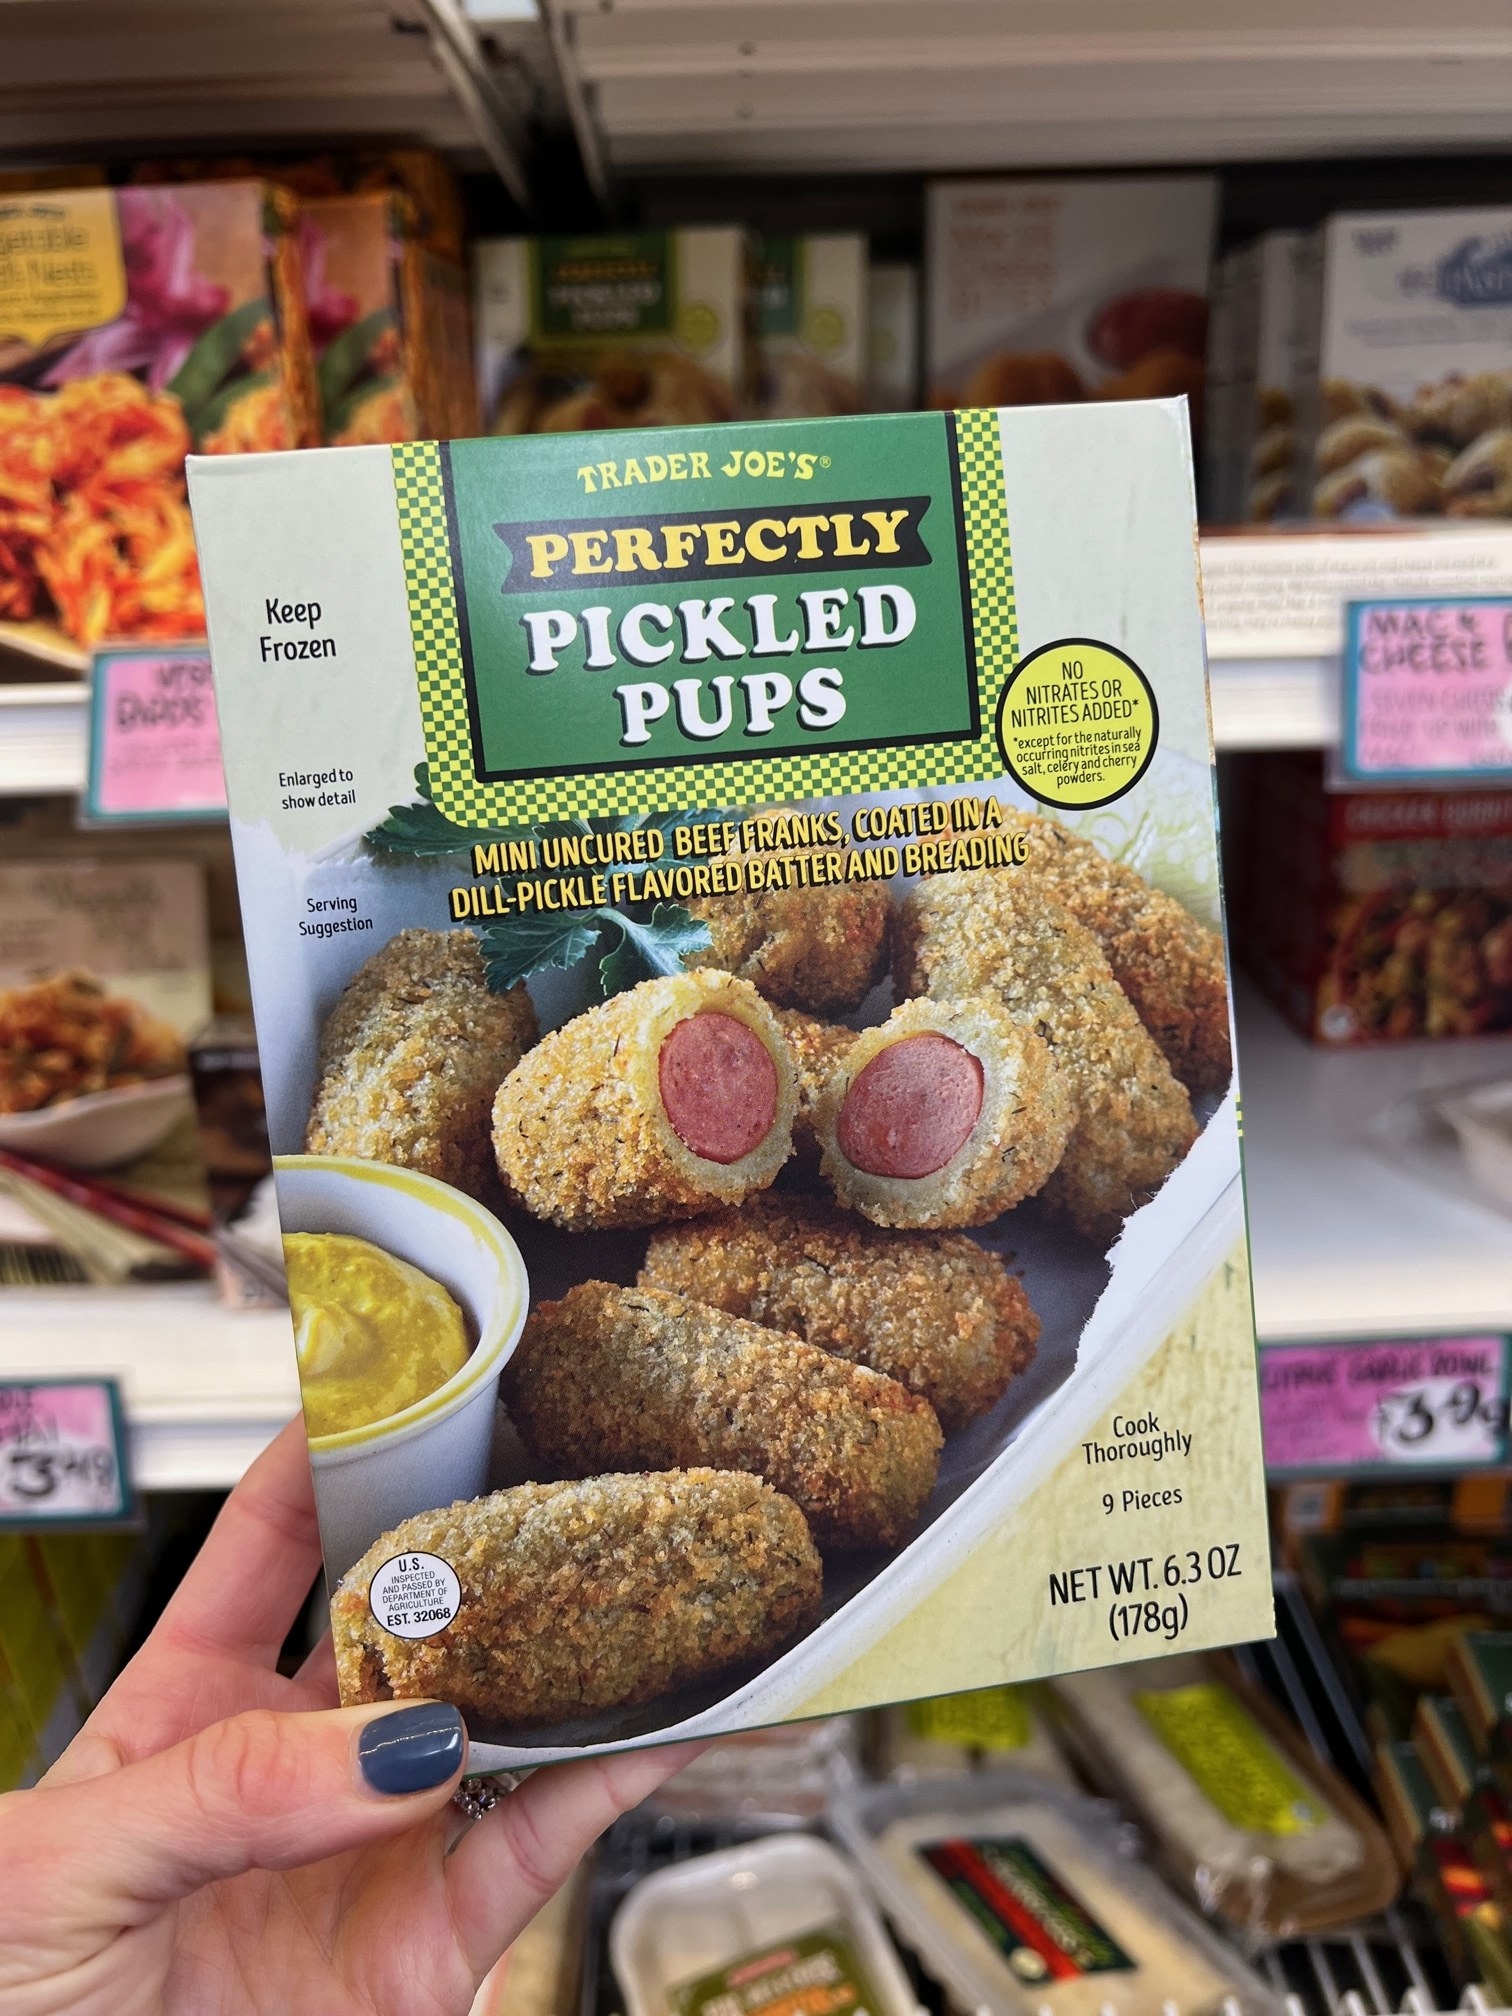 A box of Perfectly Pickled Pups: &quot;mini uncured beef franks, coated in a dill-pickle flavored batter and breading&quot;